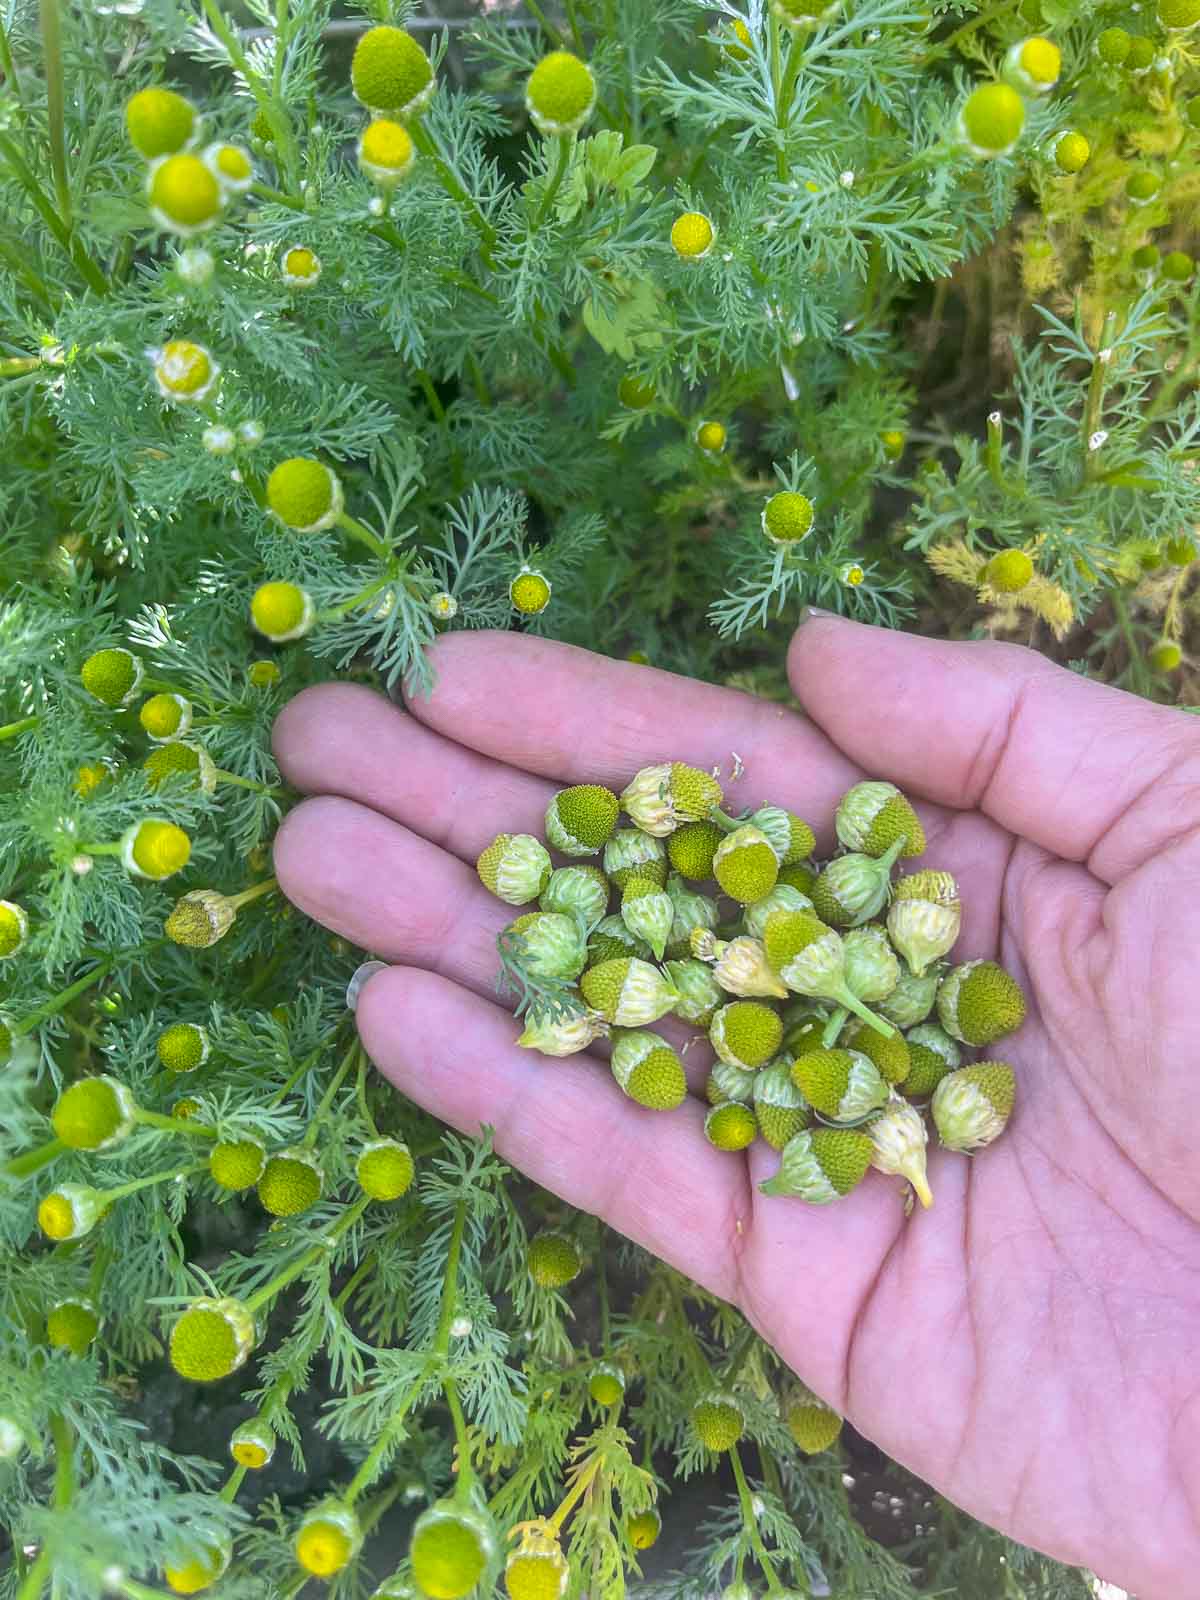 pineapple weed flowers picked in a hand